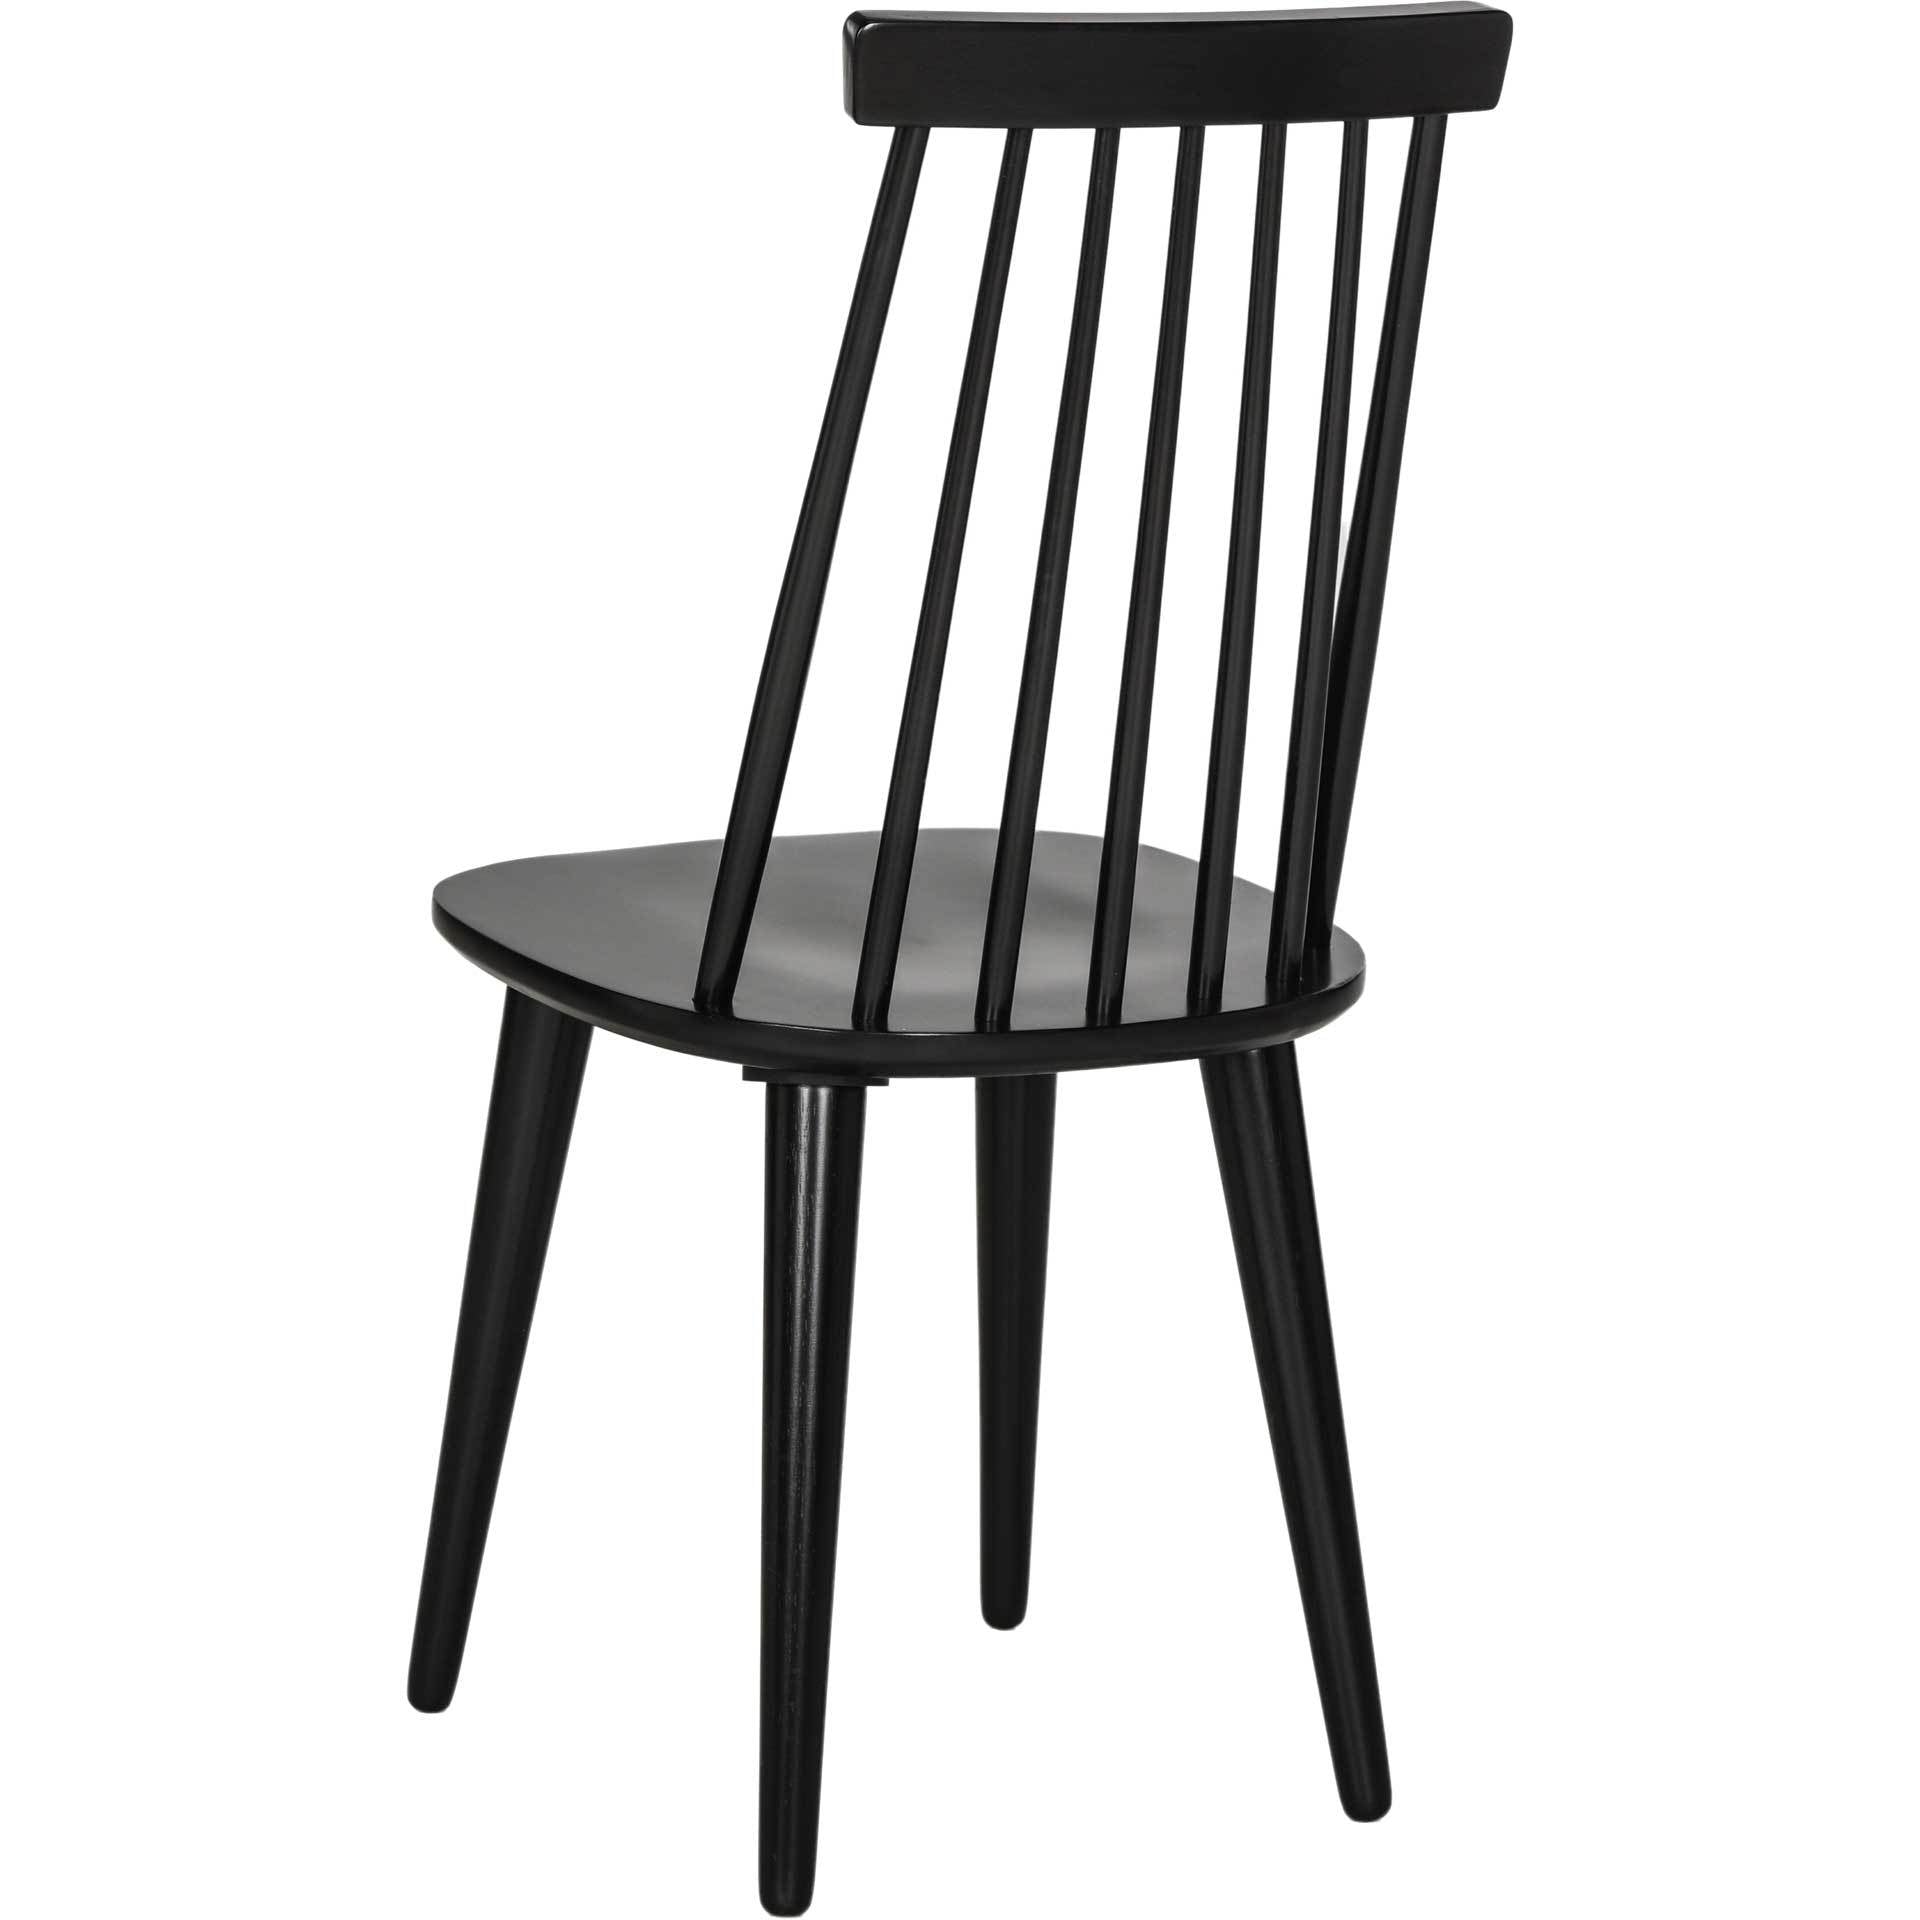 Buckley Spindle Side Chair Black (Set of 2)